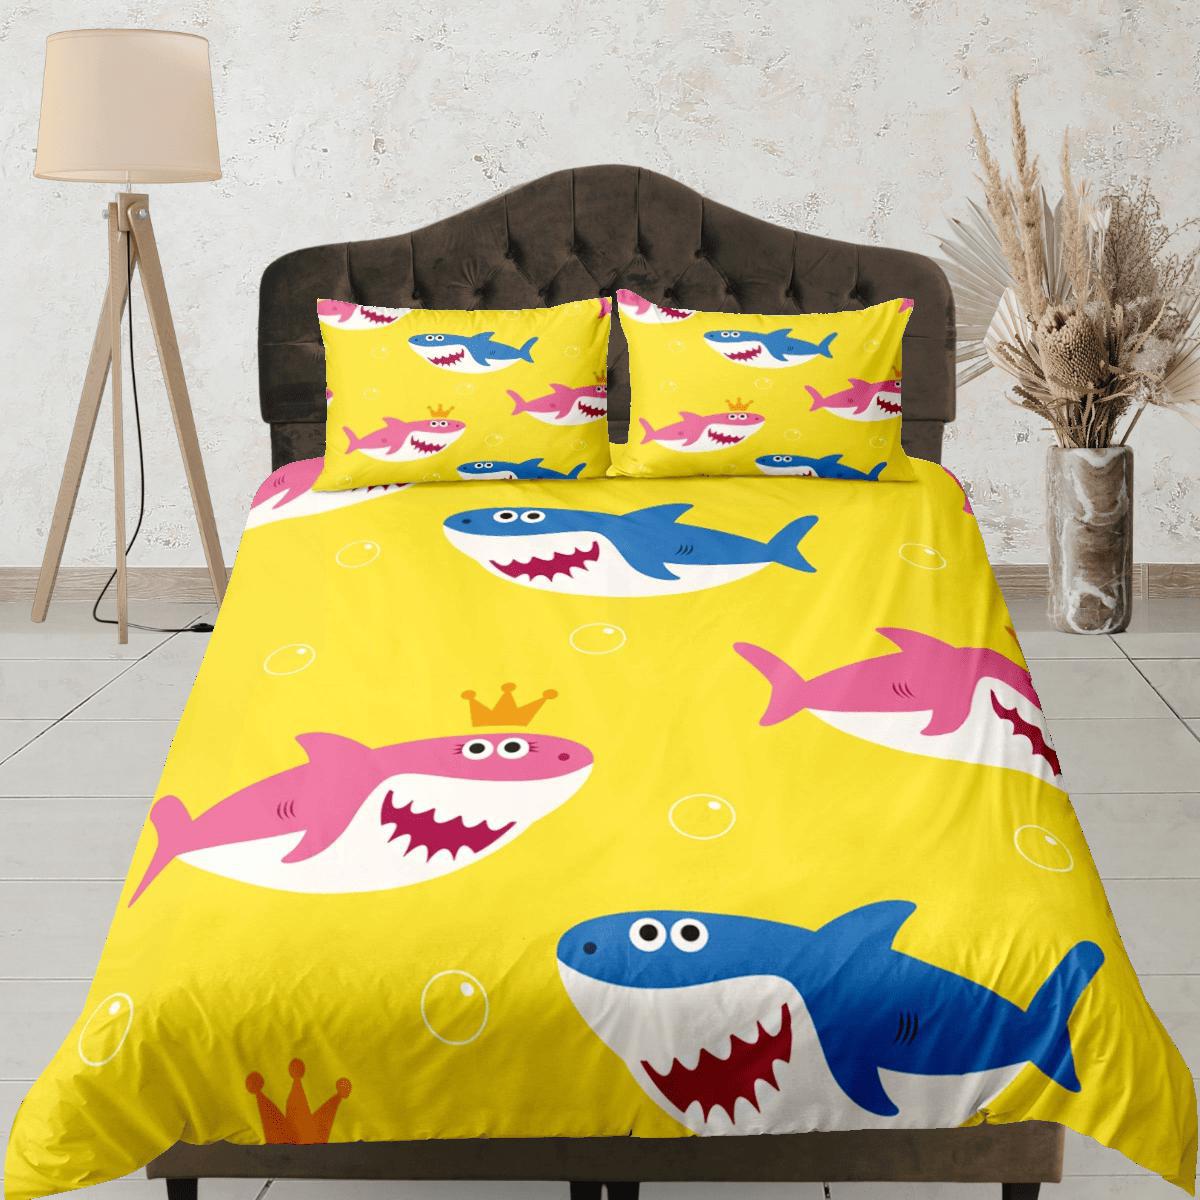 daintyduvet Happy Sharks Yellow Duvet Cover Set Colorful Bedspread, Kids Full Bedding Set with Pillowcase, Comforter Cover Twin